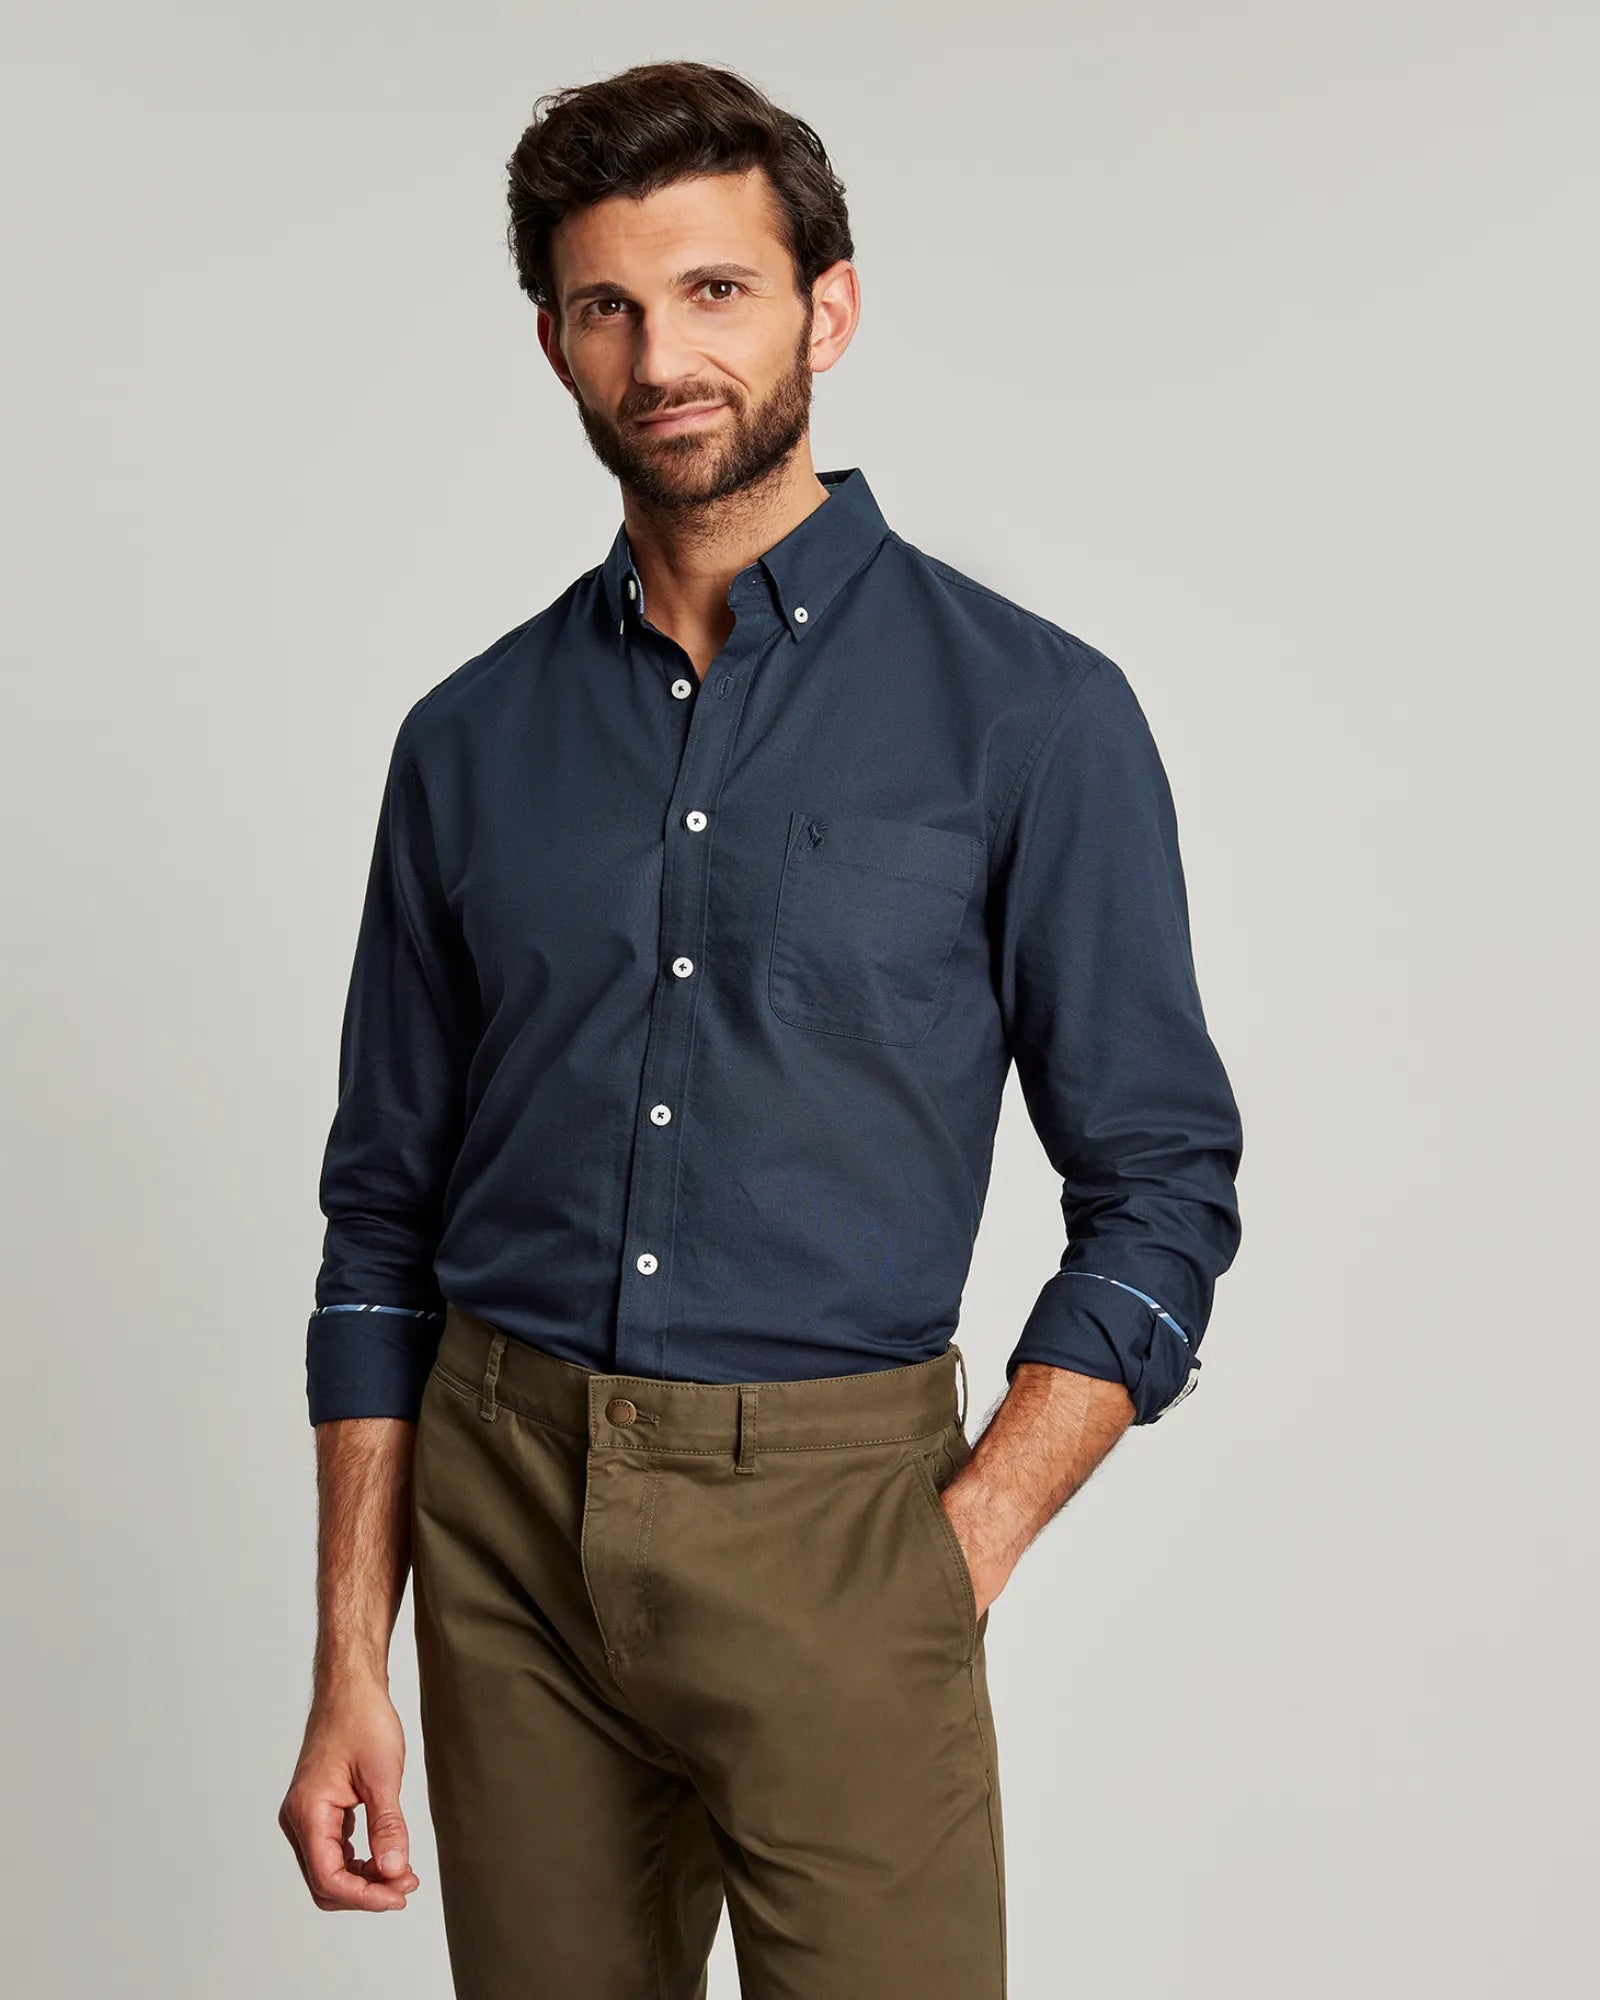 Oxford Navy Classic Fit Shirt